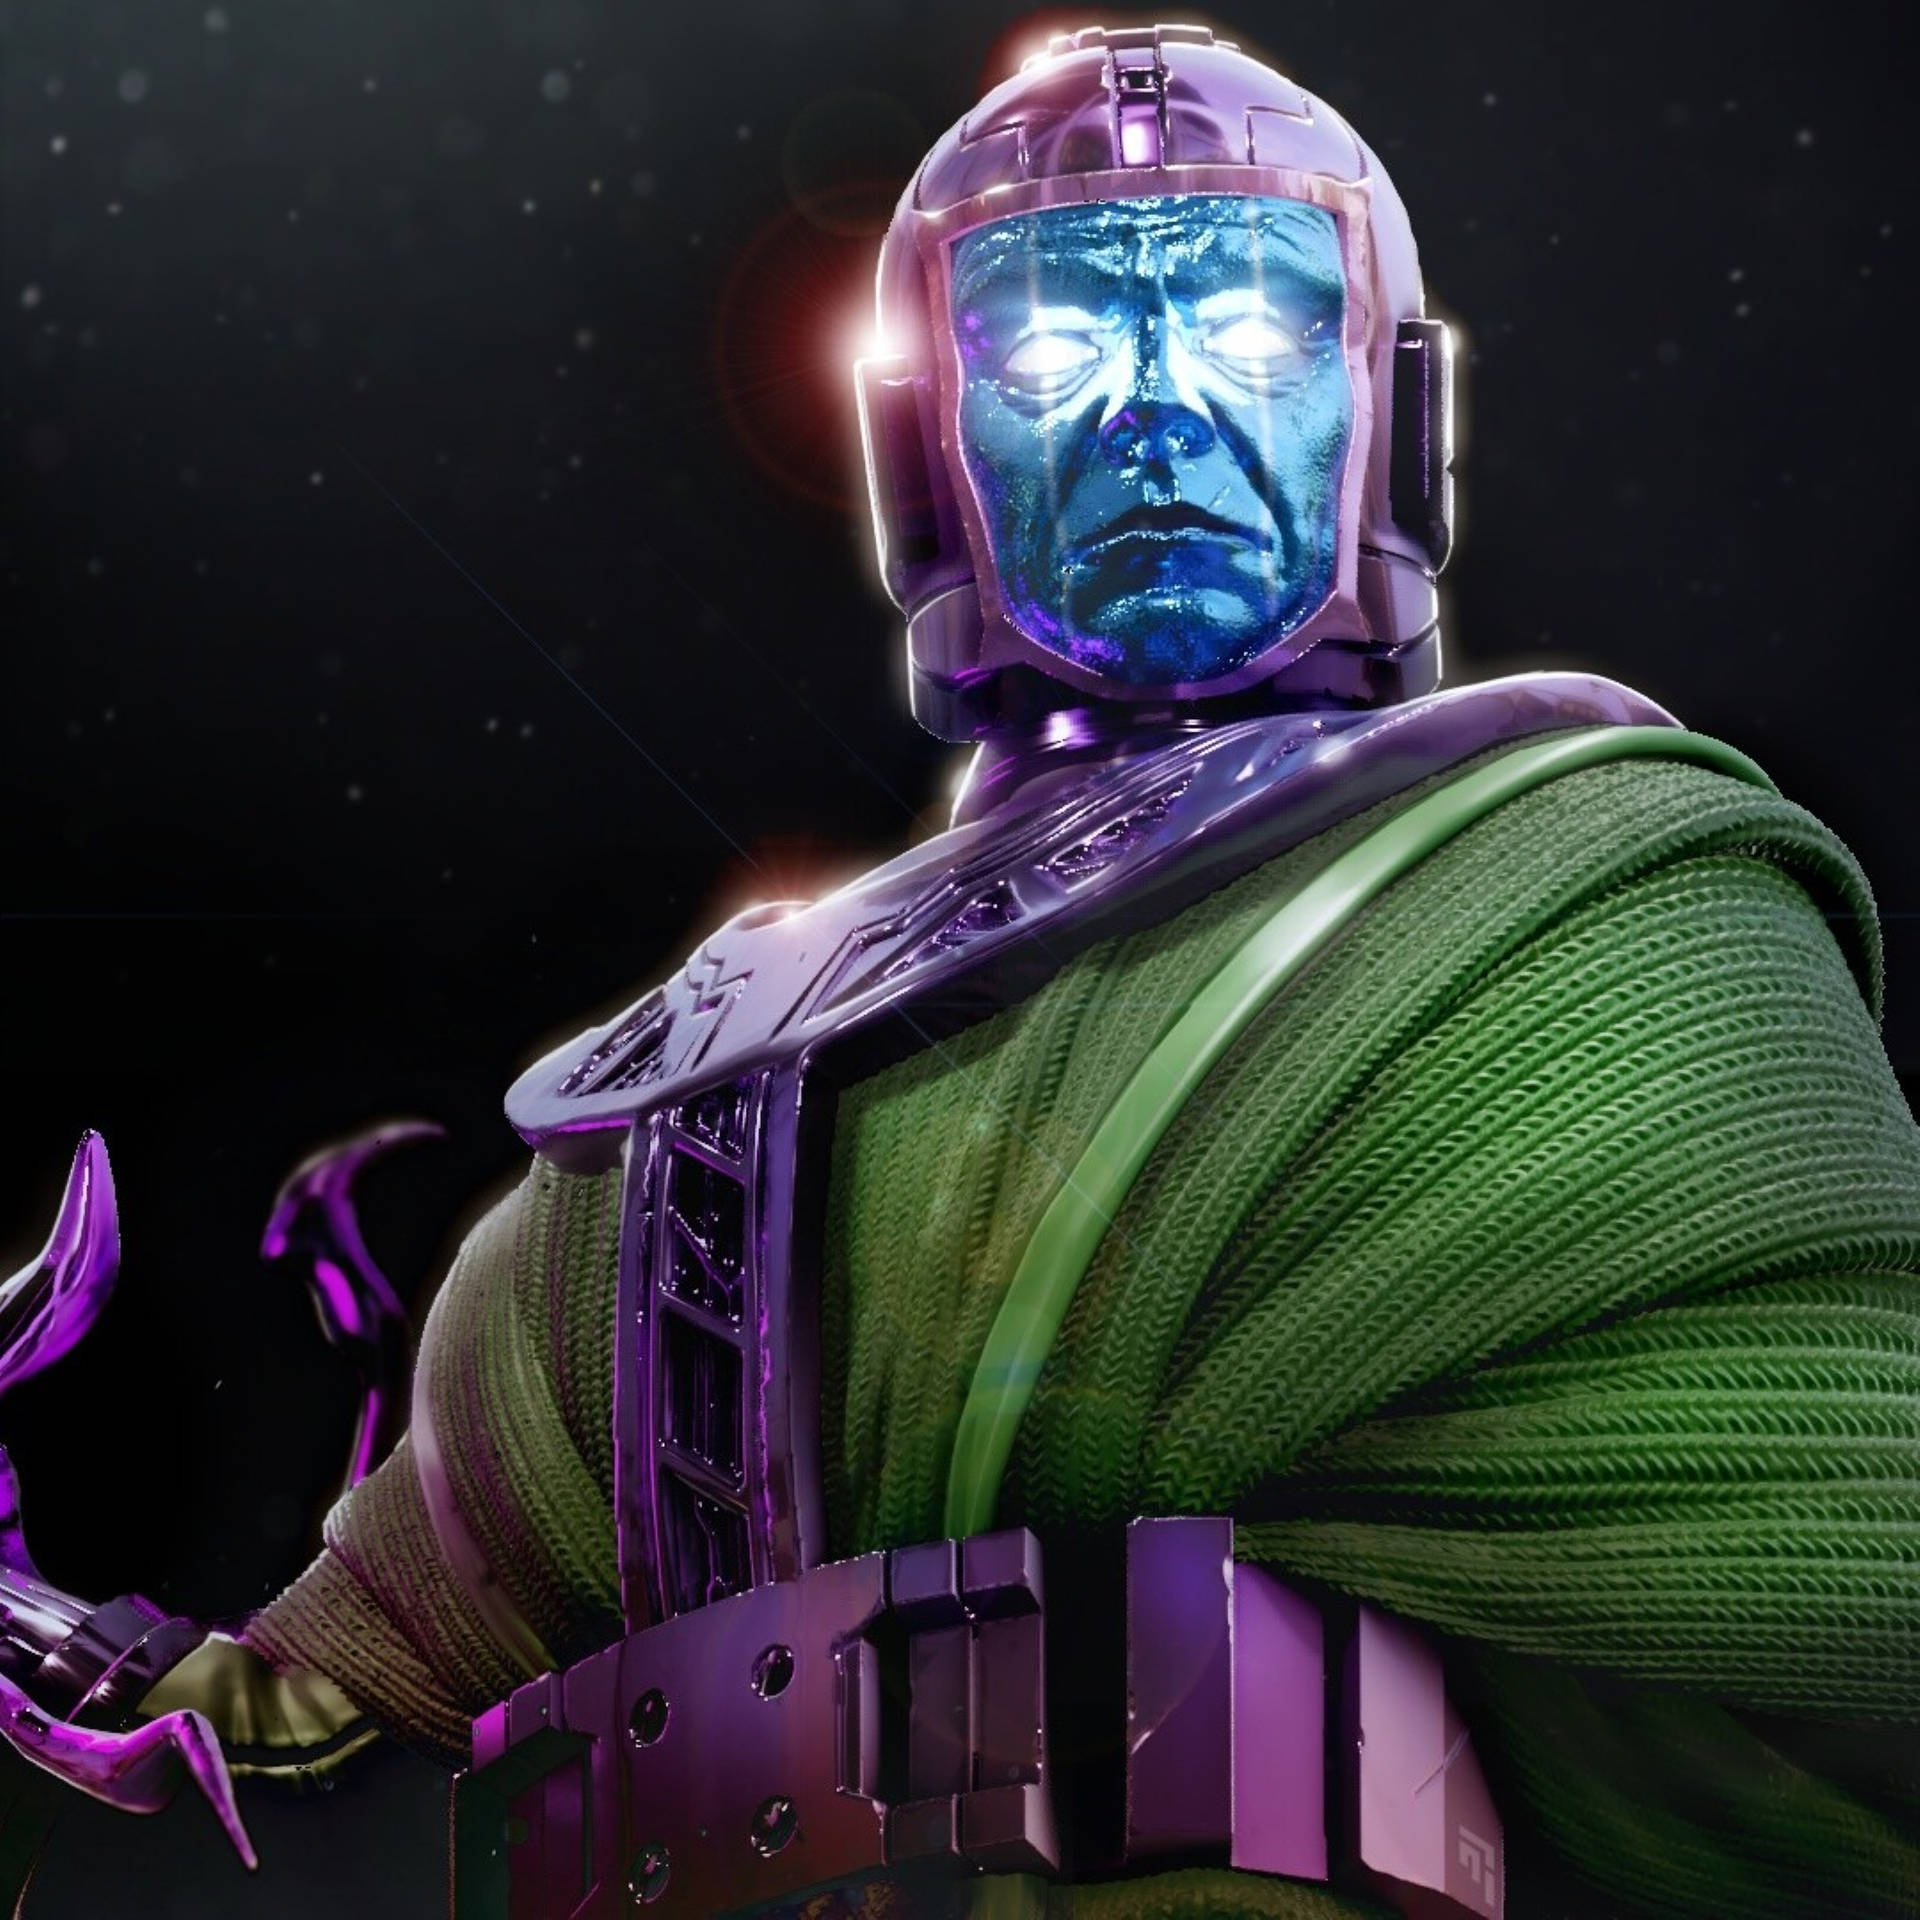 Kang the Conqueror in All His Glory Wallpaper